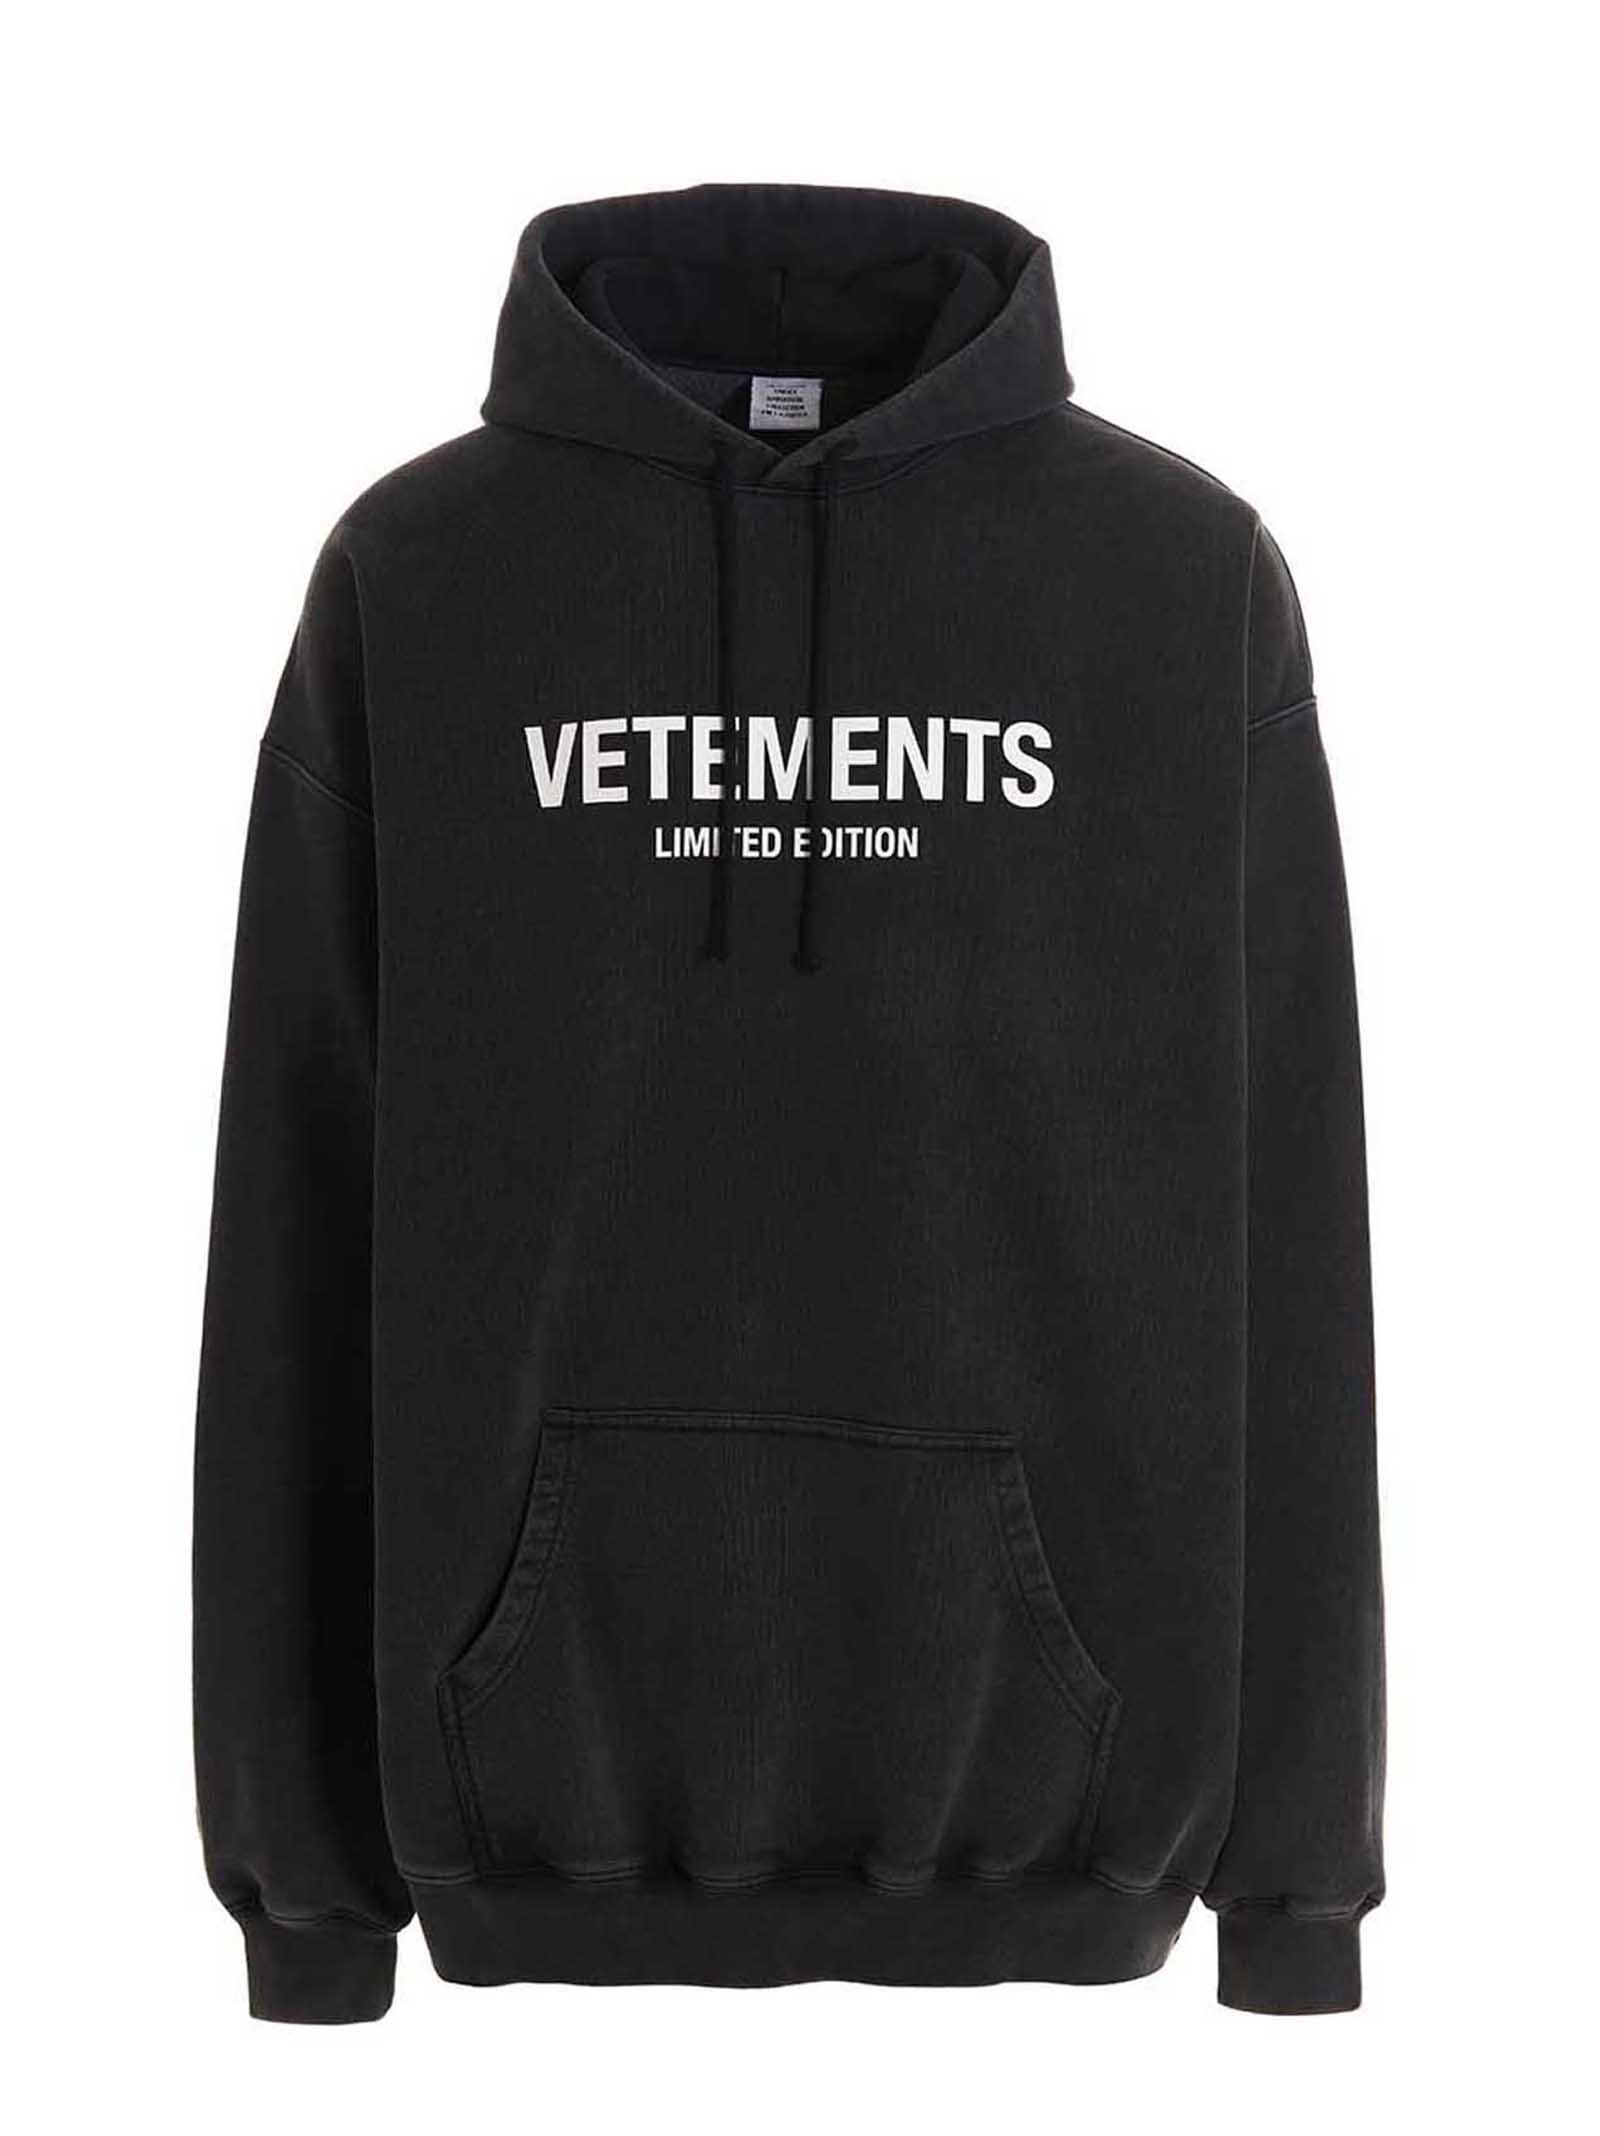 VETEMENTS limited Edition Hoodie